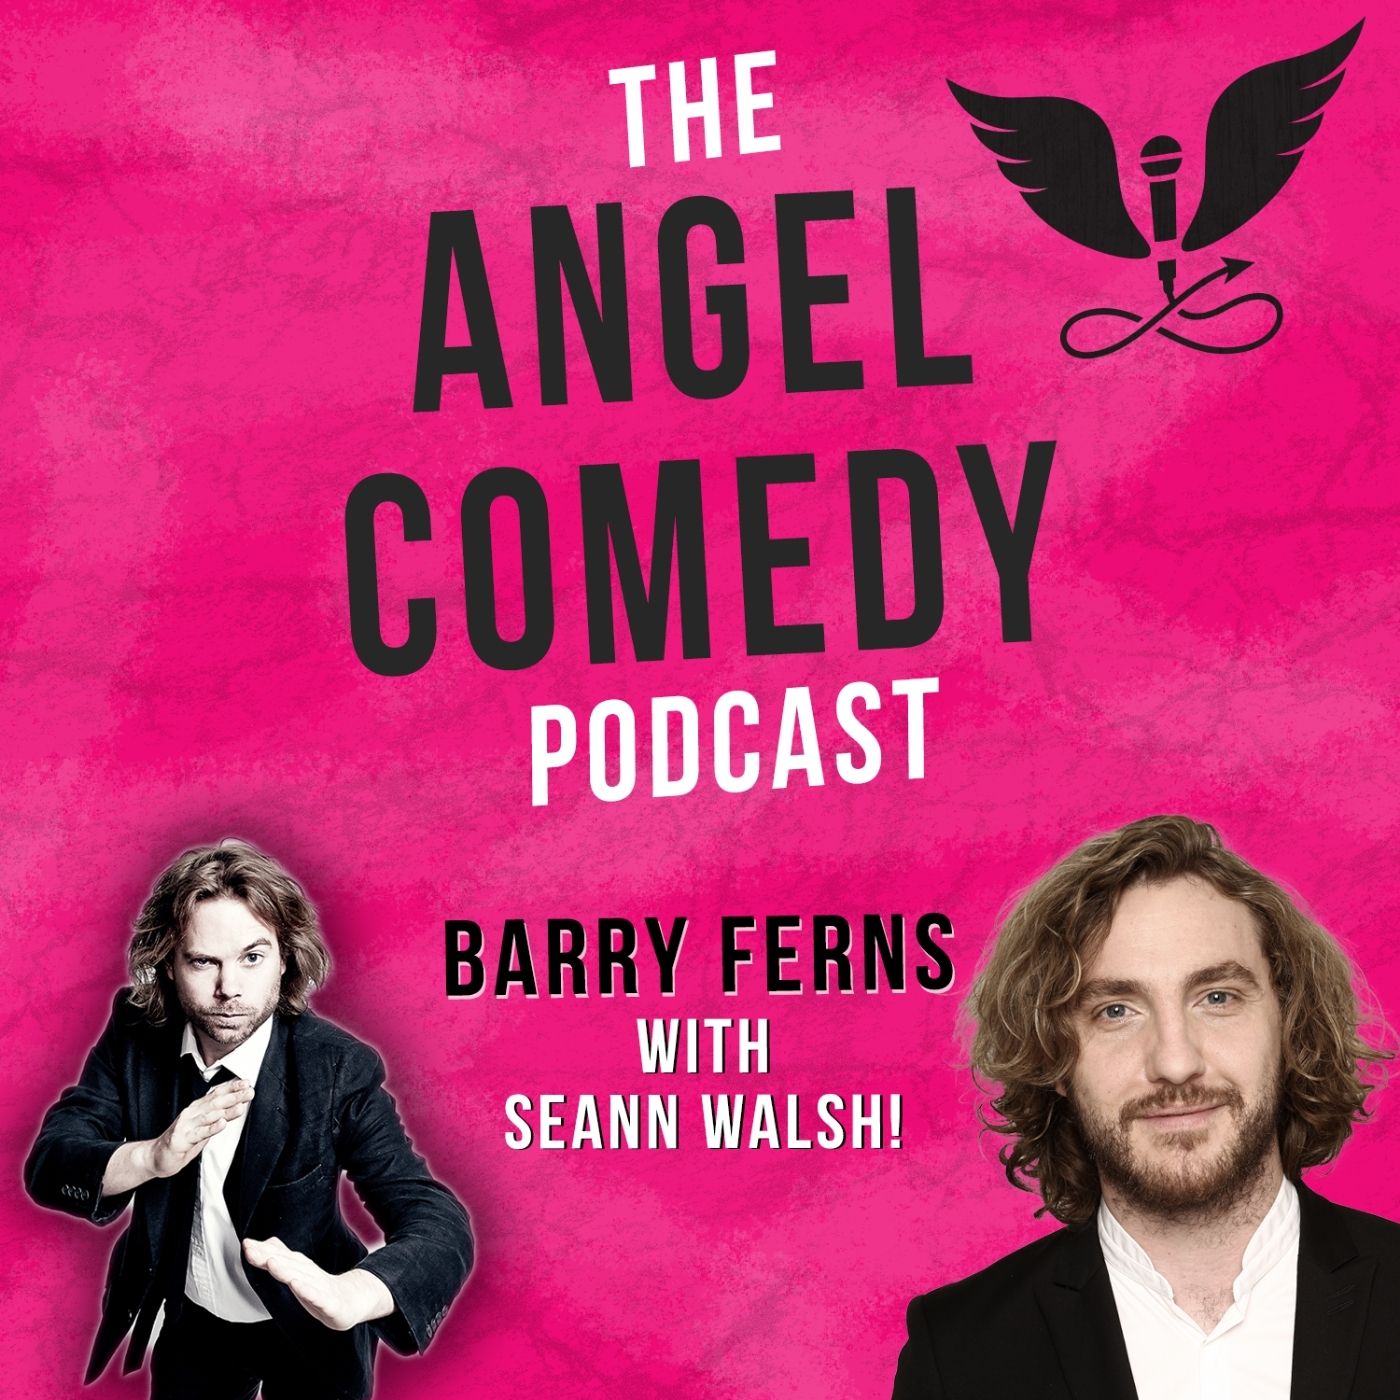 Podcast: The Angel Comedy Podcast with Seann Walsh - Angel Comedy